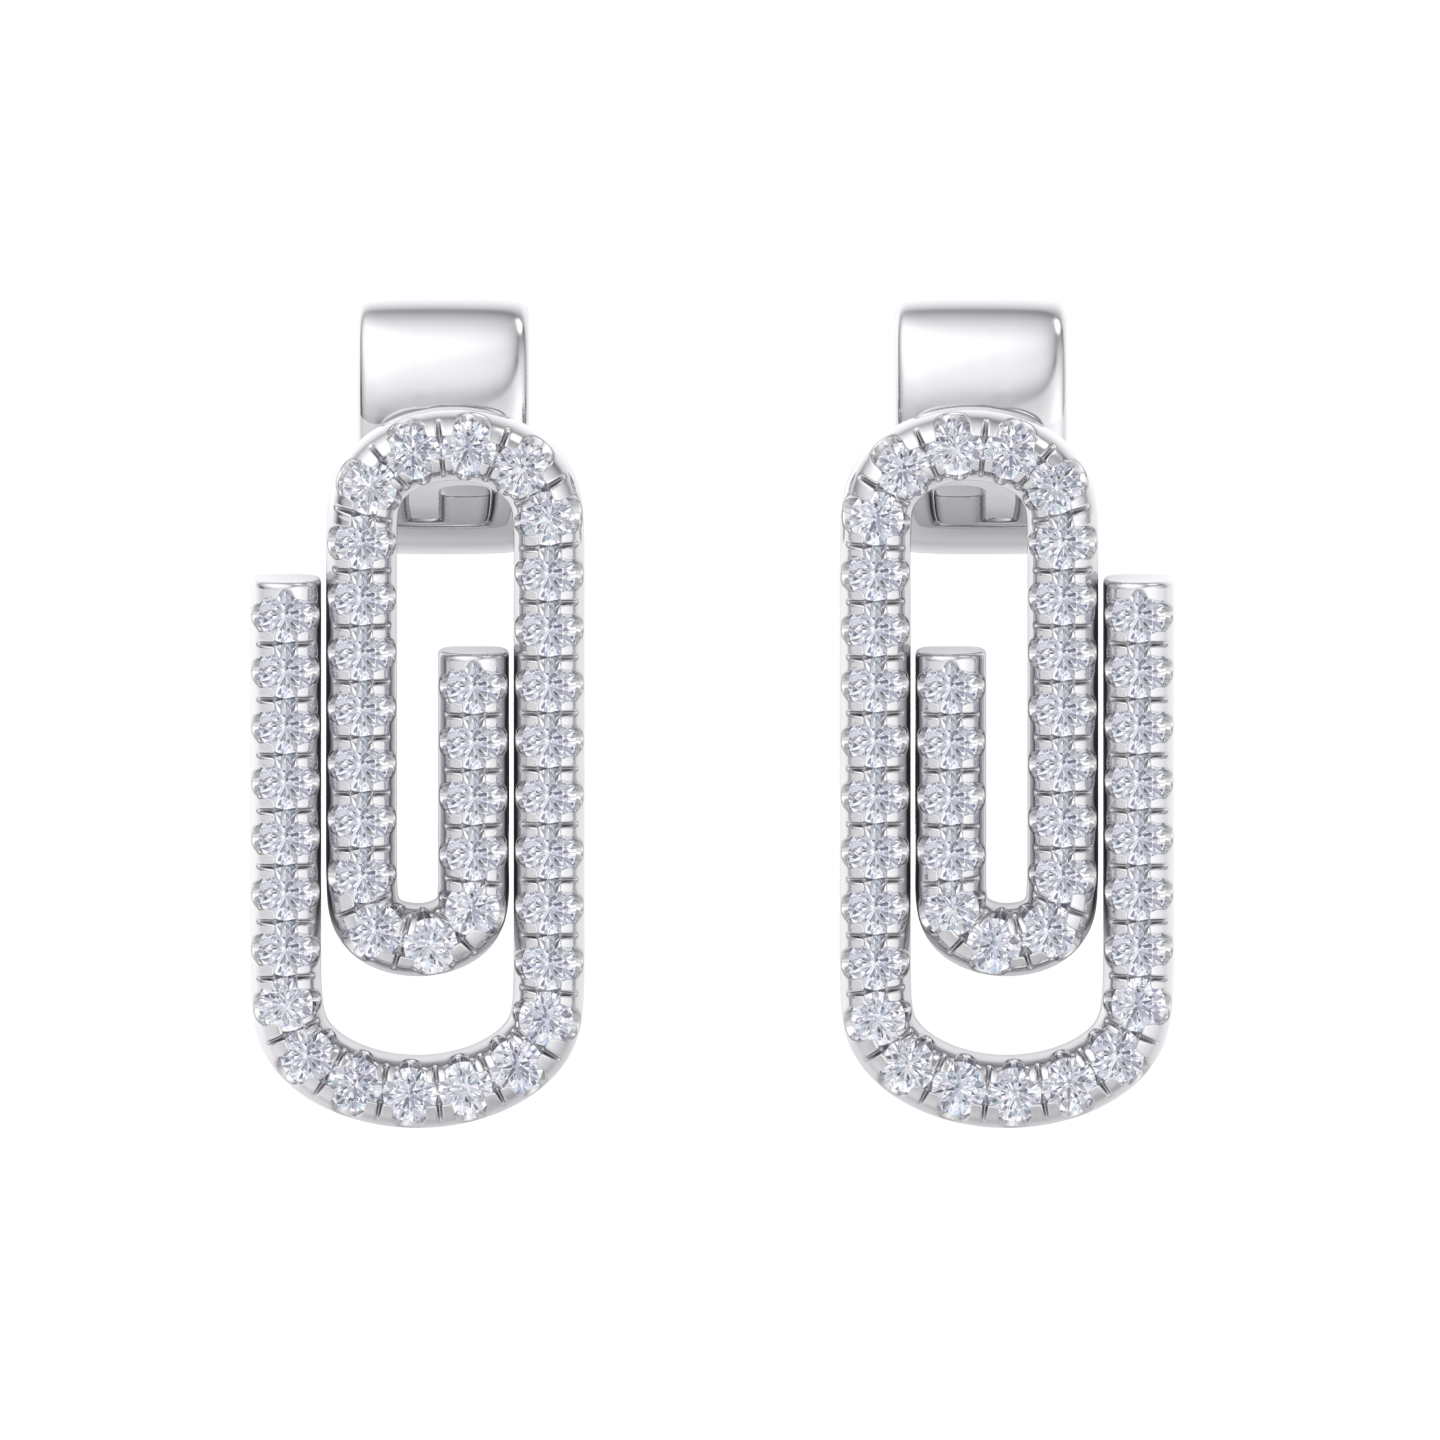 Diamond link earrings in white gold with white diamonds of 0.33 ct in weight